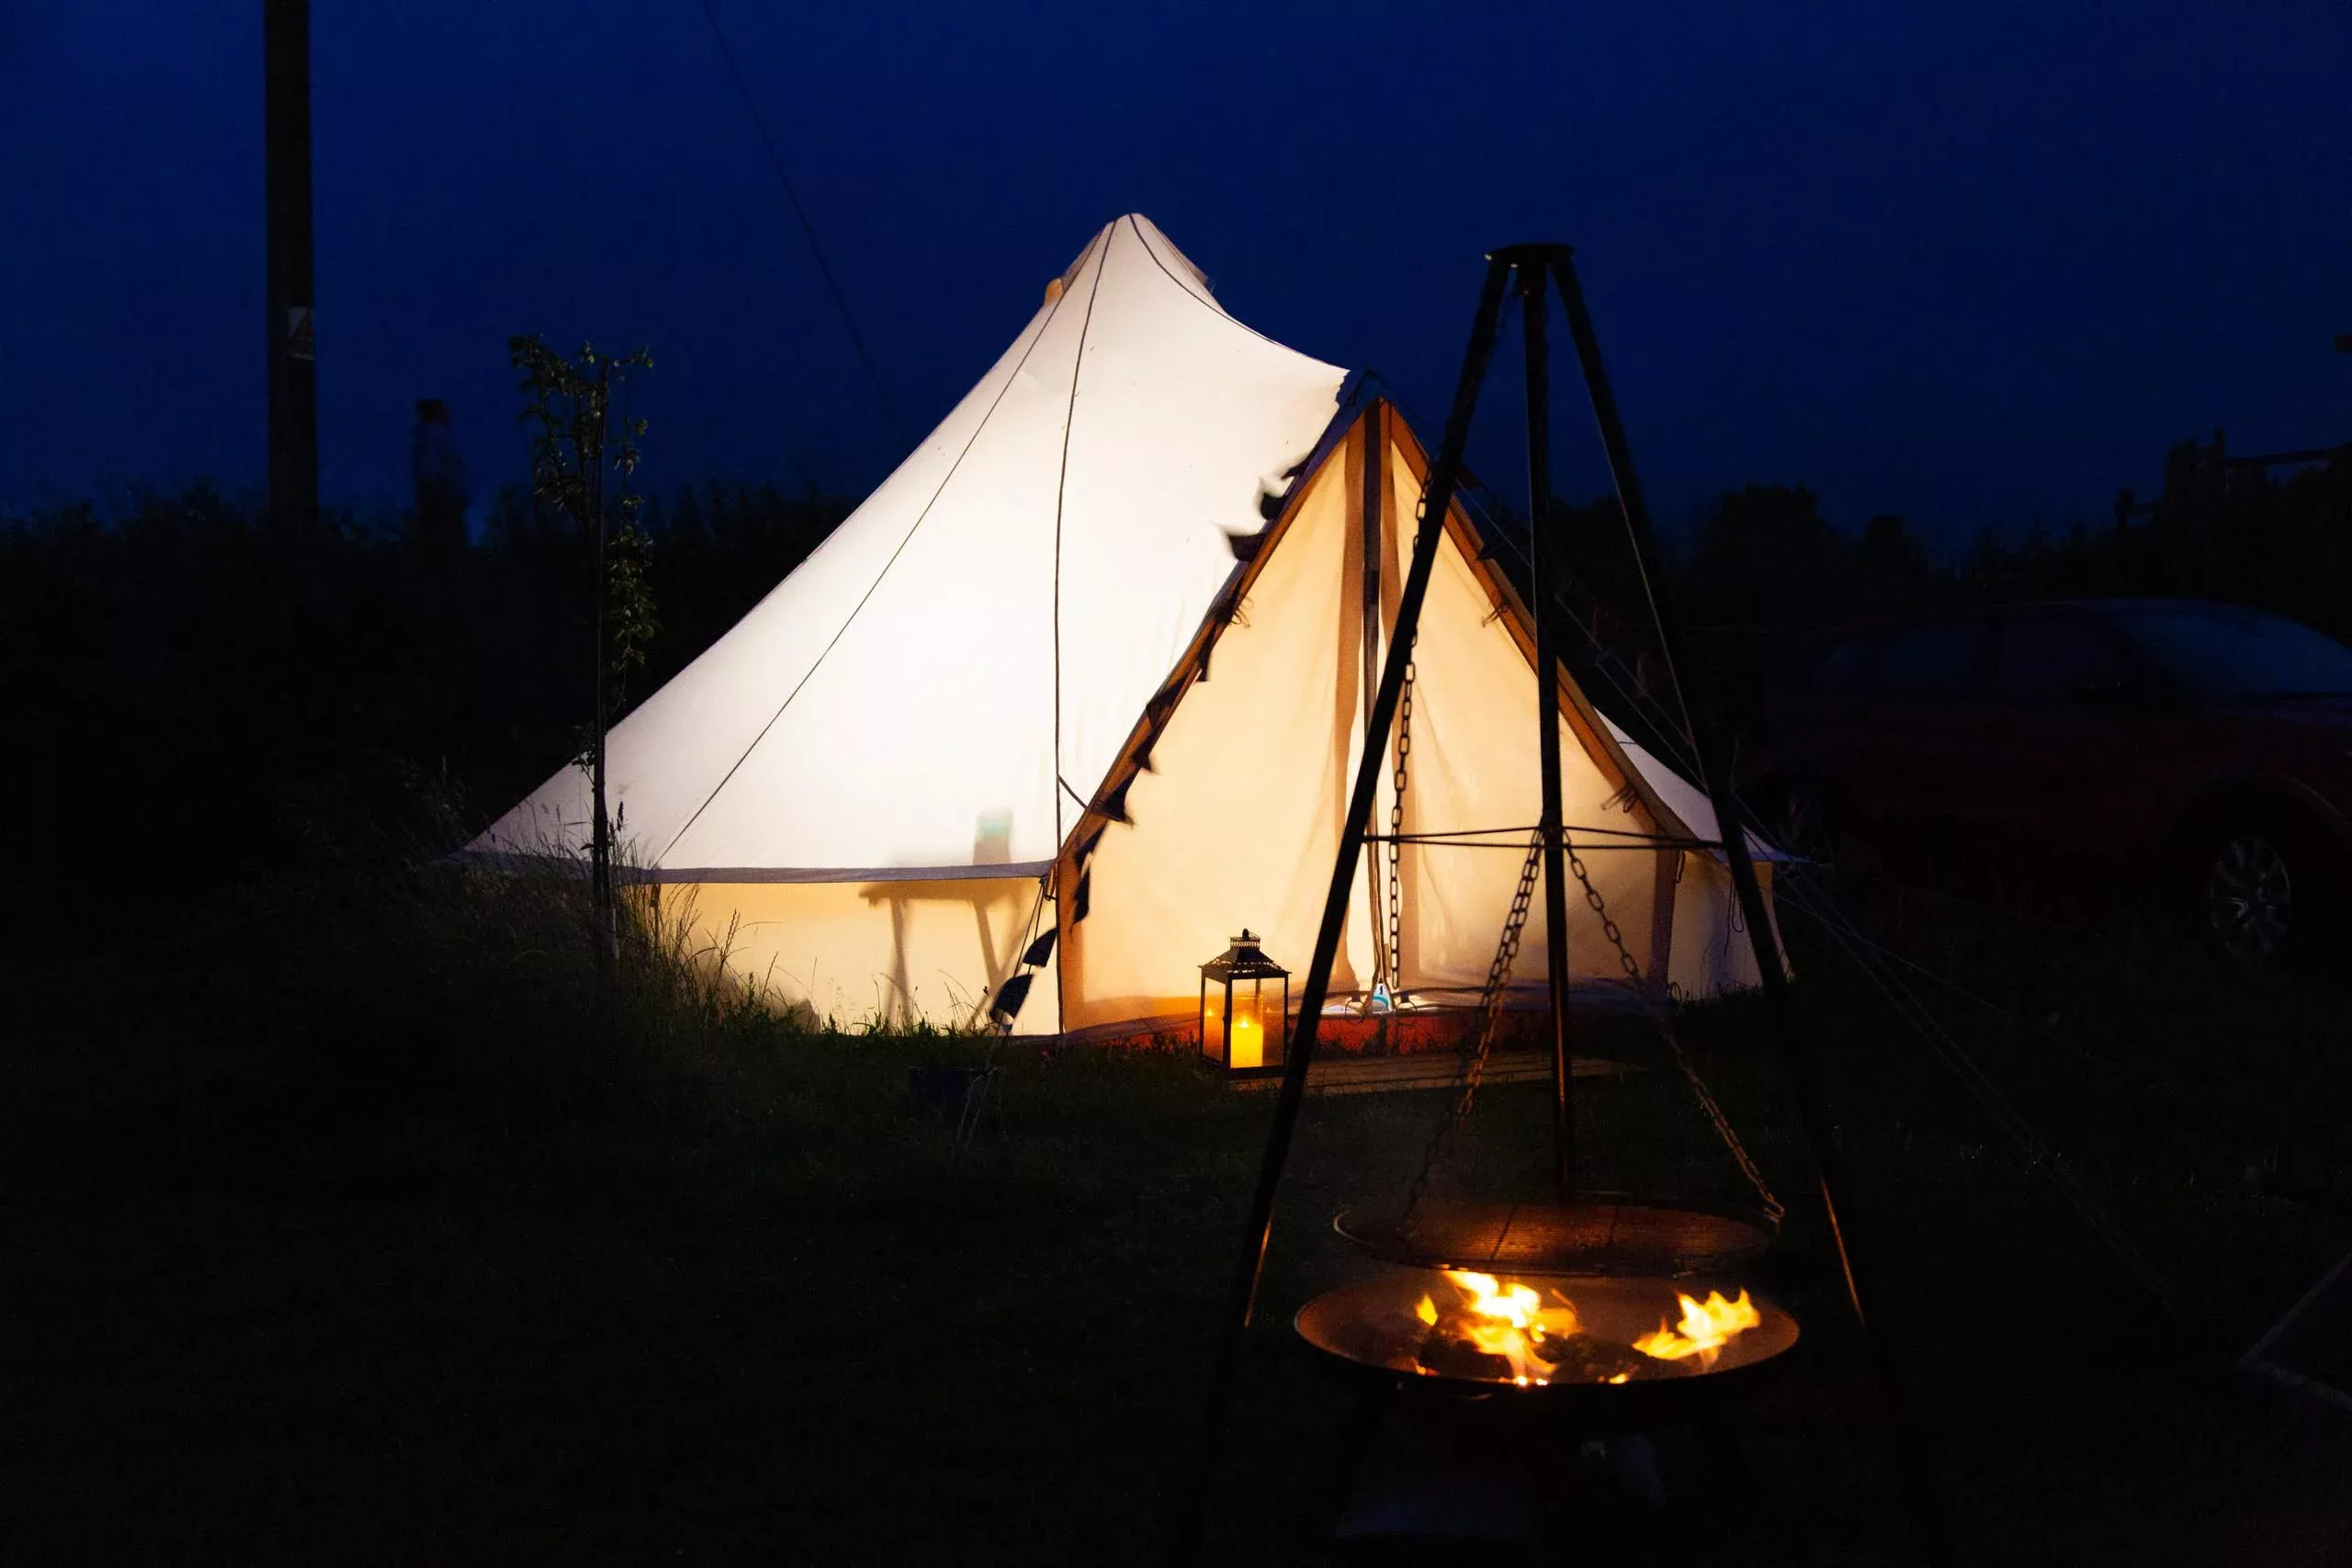 Glamping Yurt at night with a lit campfire